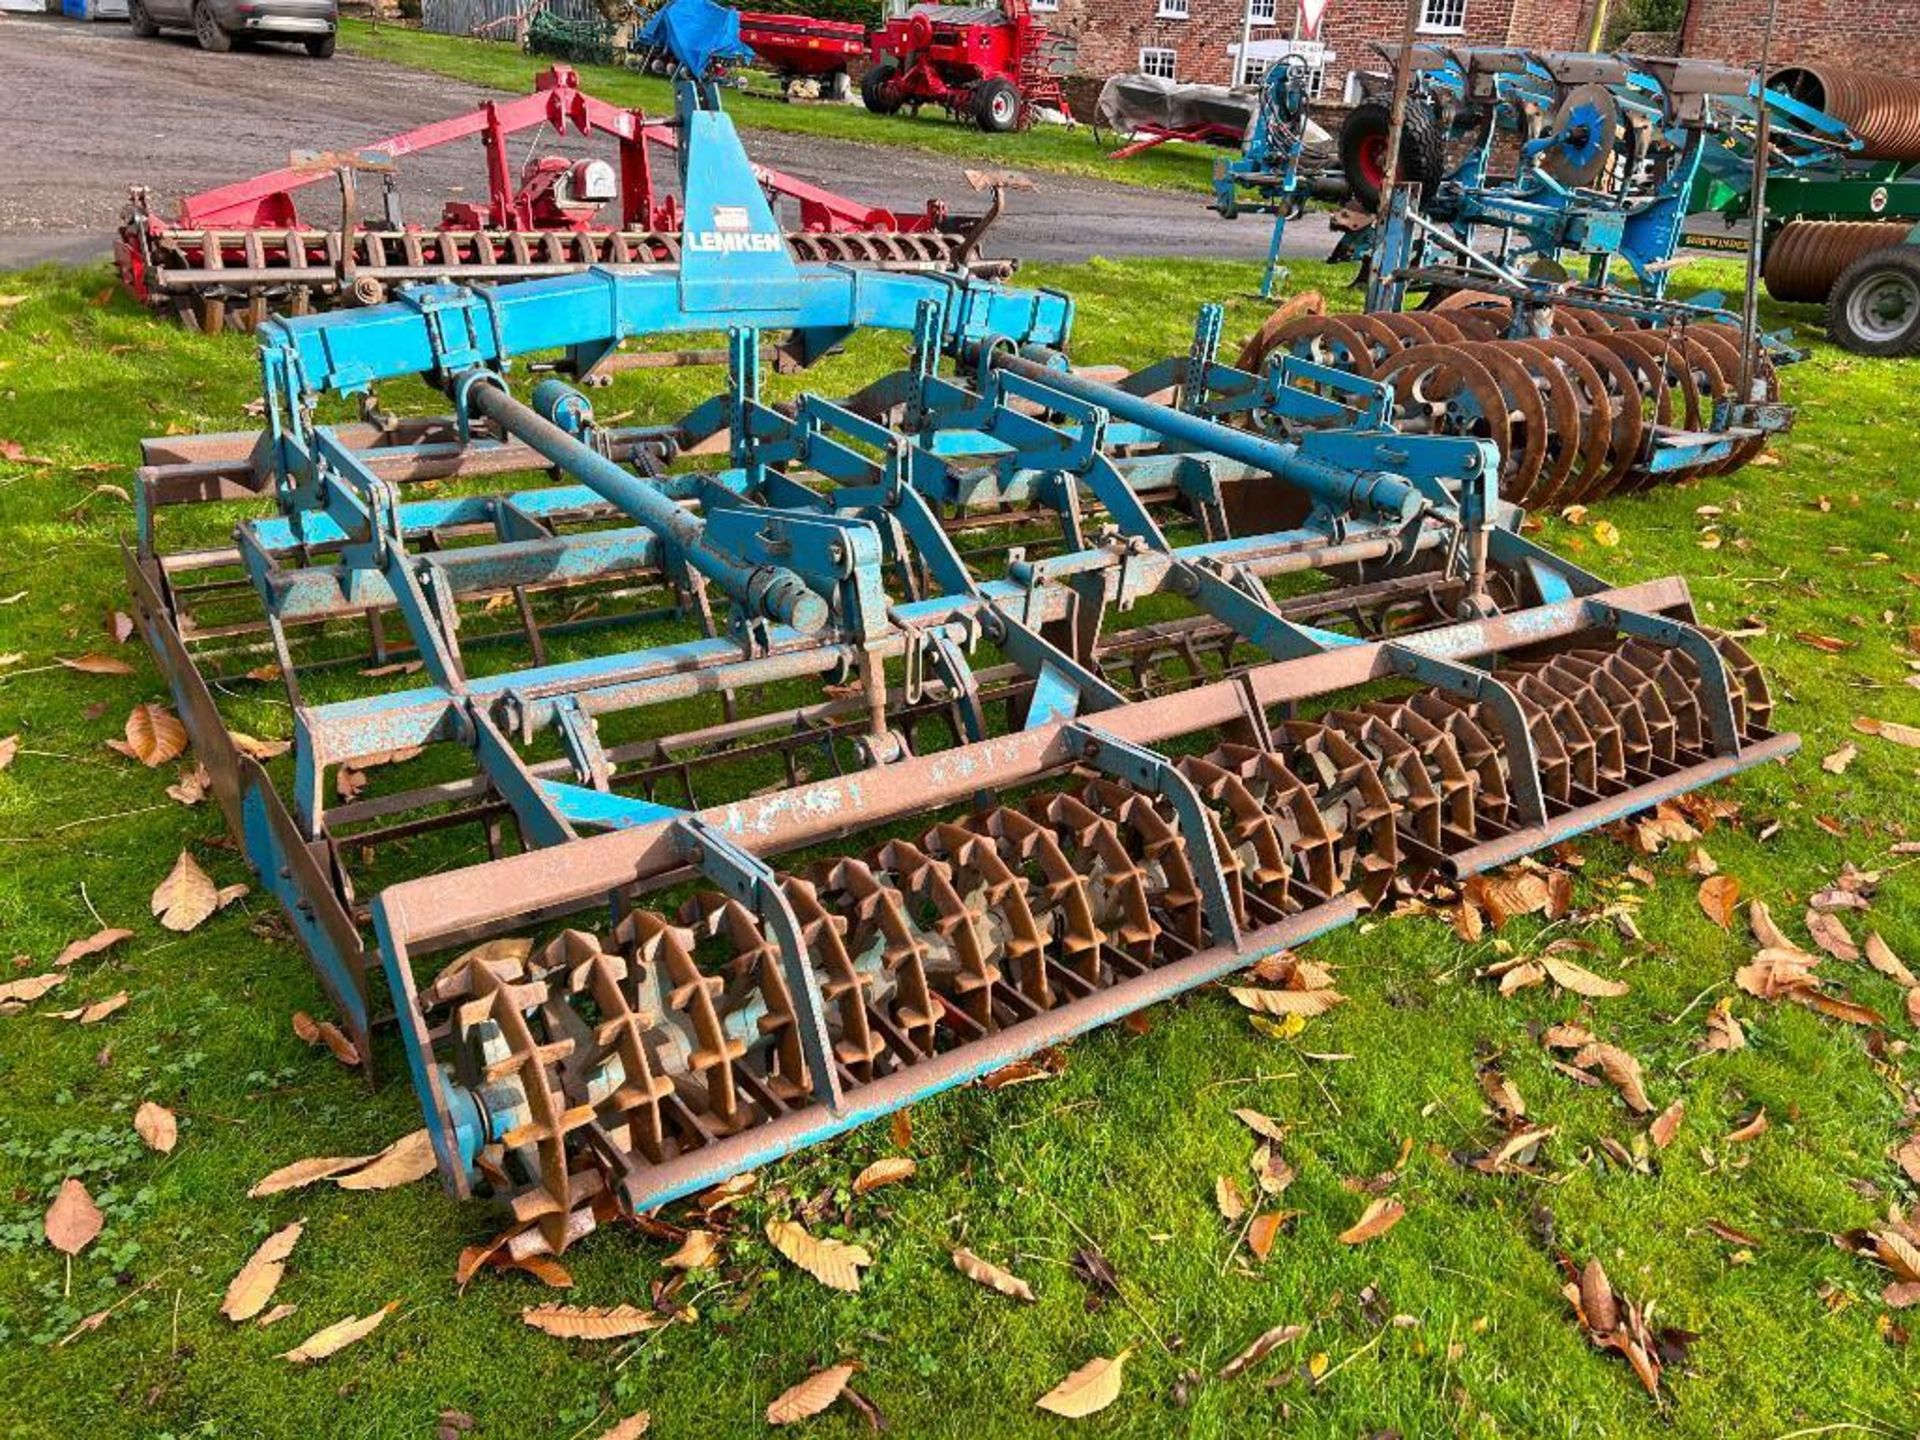 1990 Lemken S300 3m Terra Tilth c/w set of brand new tines. Serial No: 164 577.  Manual in the offic - Image 4 of 9